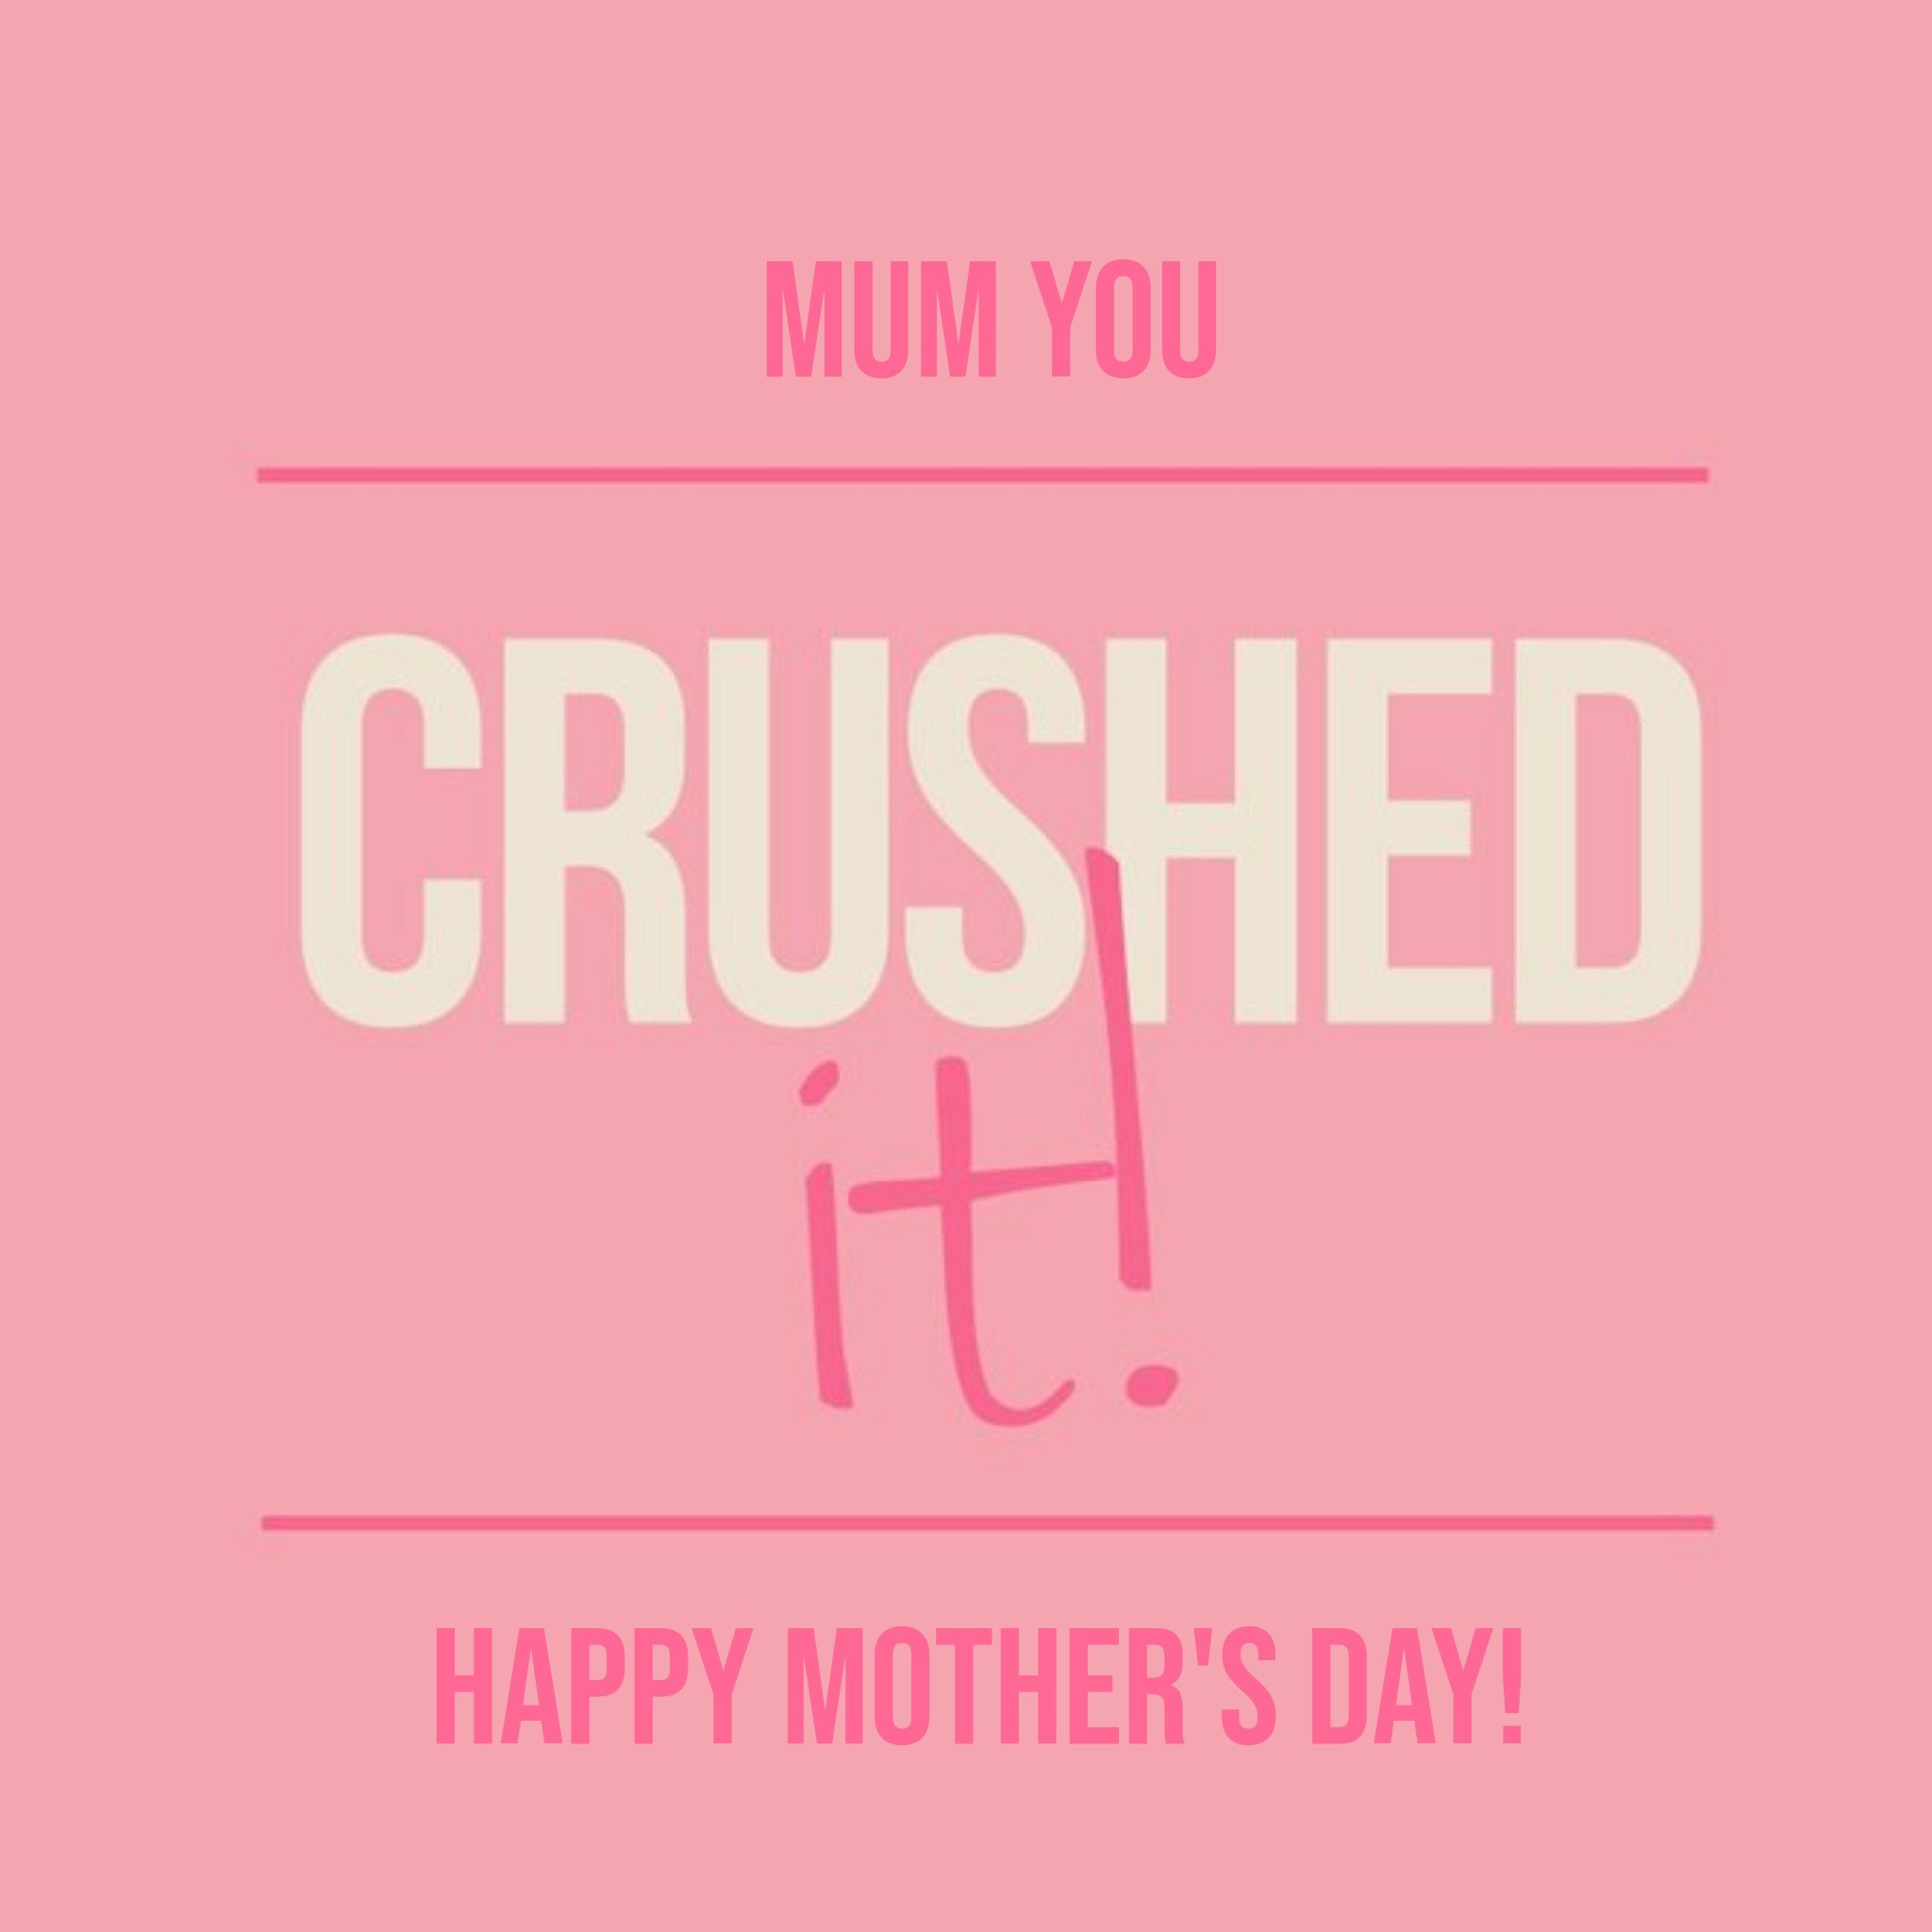 Moonpig Mum You Crushed It Happy Mother's Day Square Card